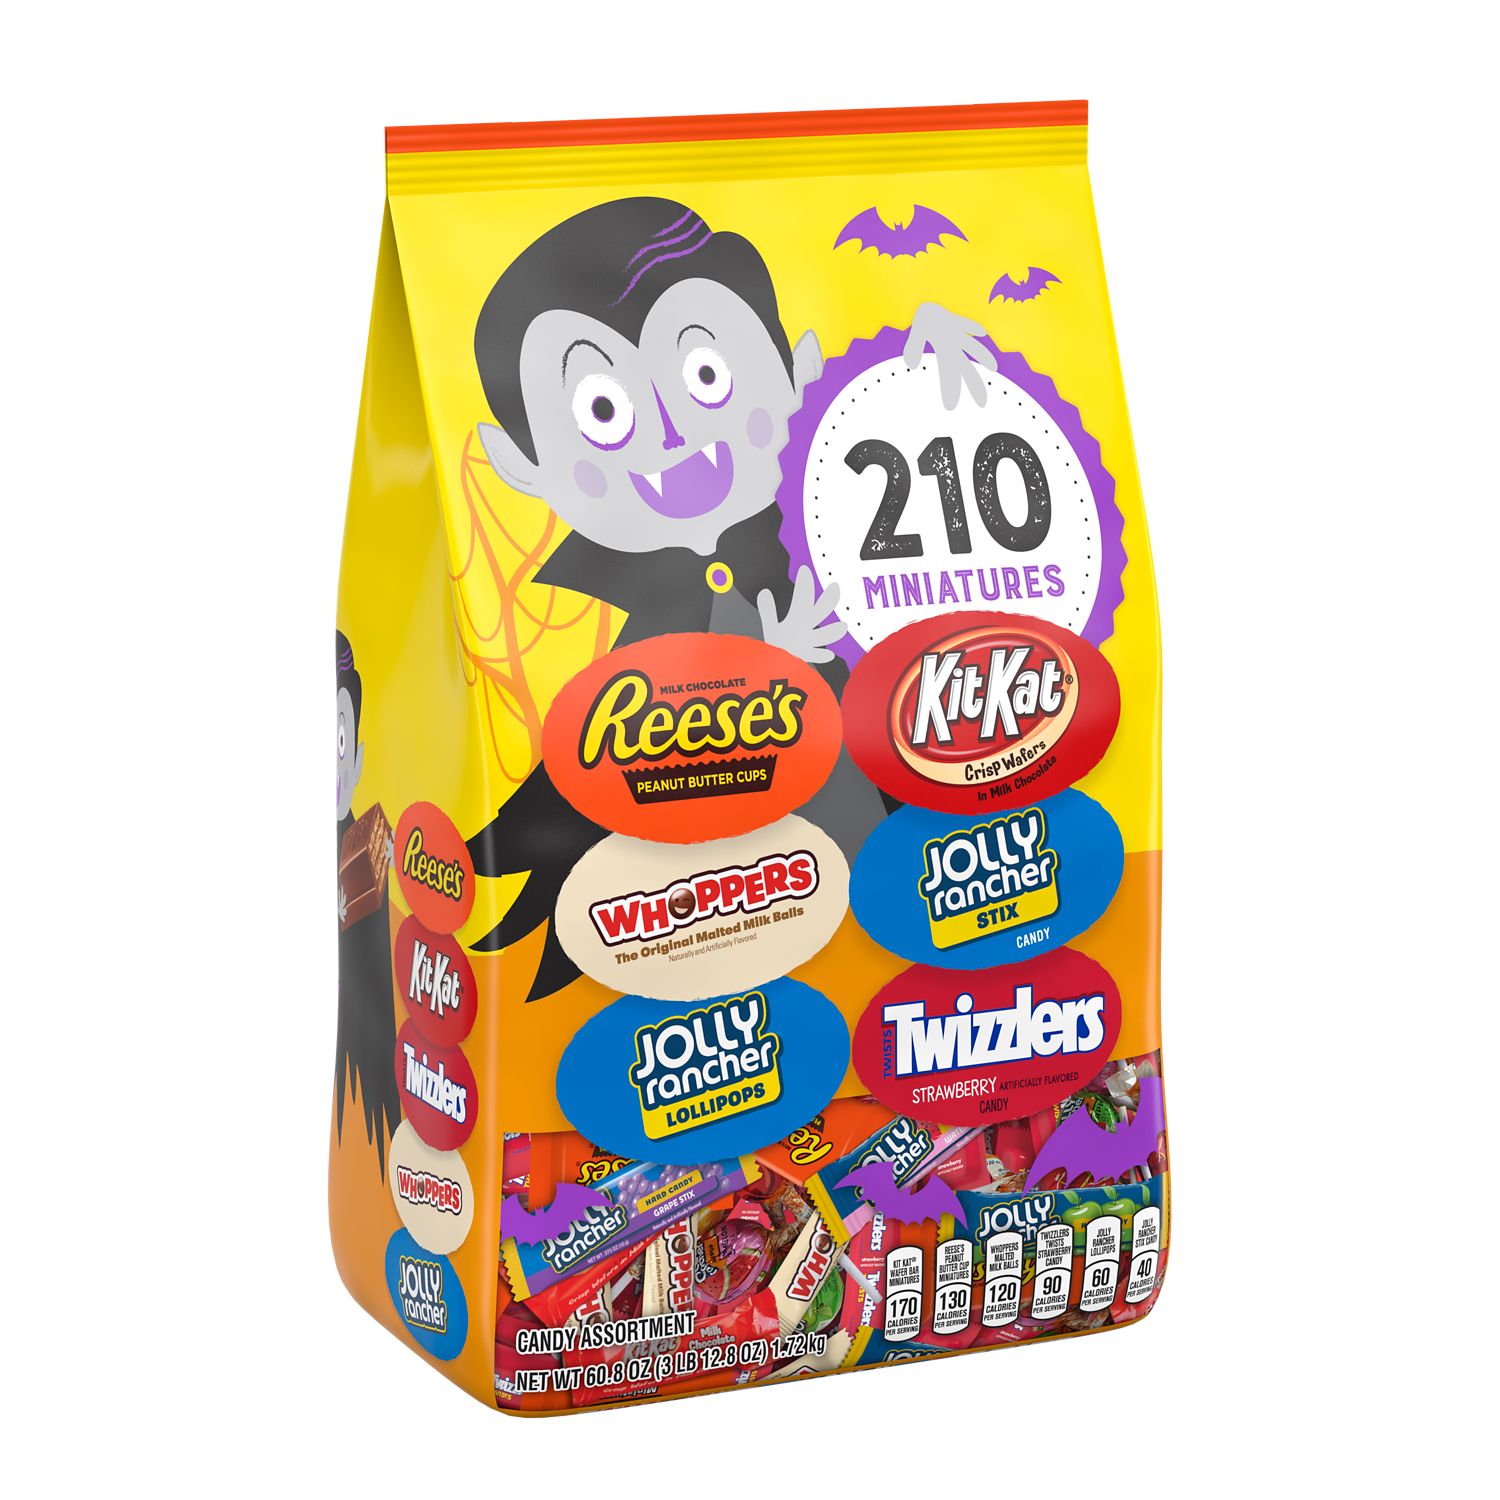 Hershey, Chocolate and Sweets Assortment Miniatures Candy, Halloween, 60.8 oz, Bulk Bag, 210 Pieces - image 1 of 6